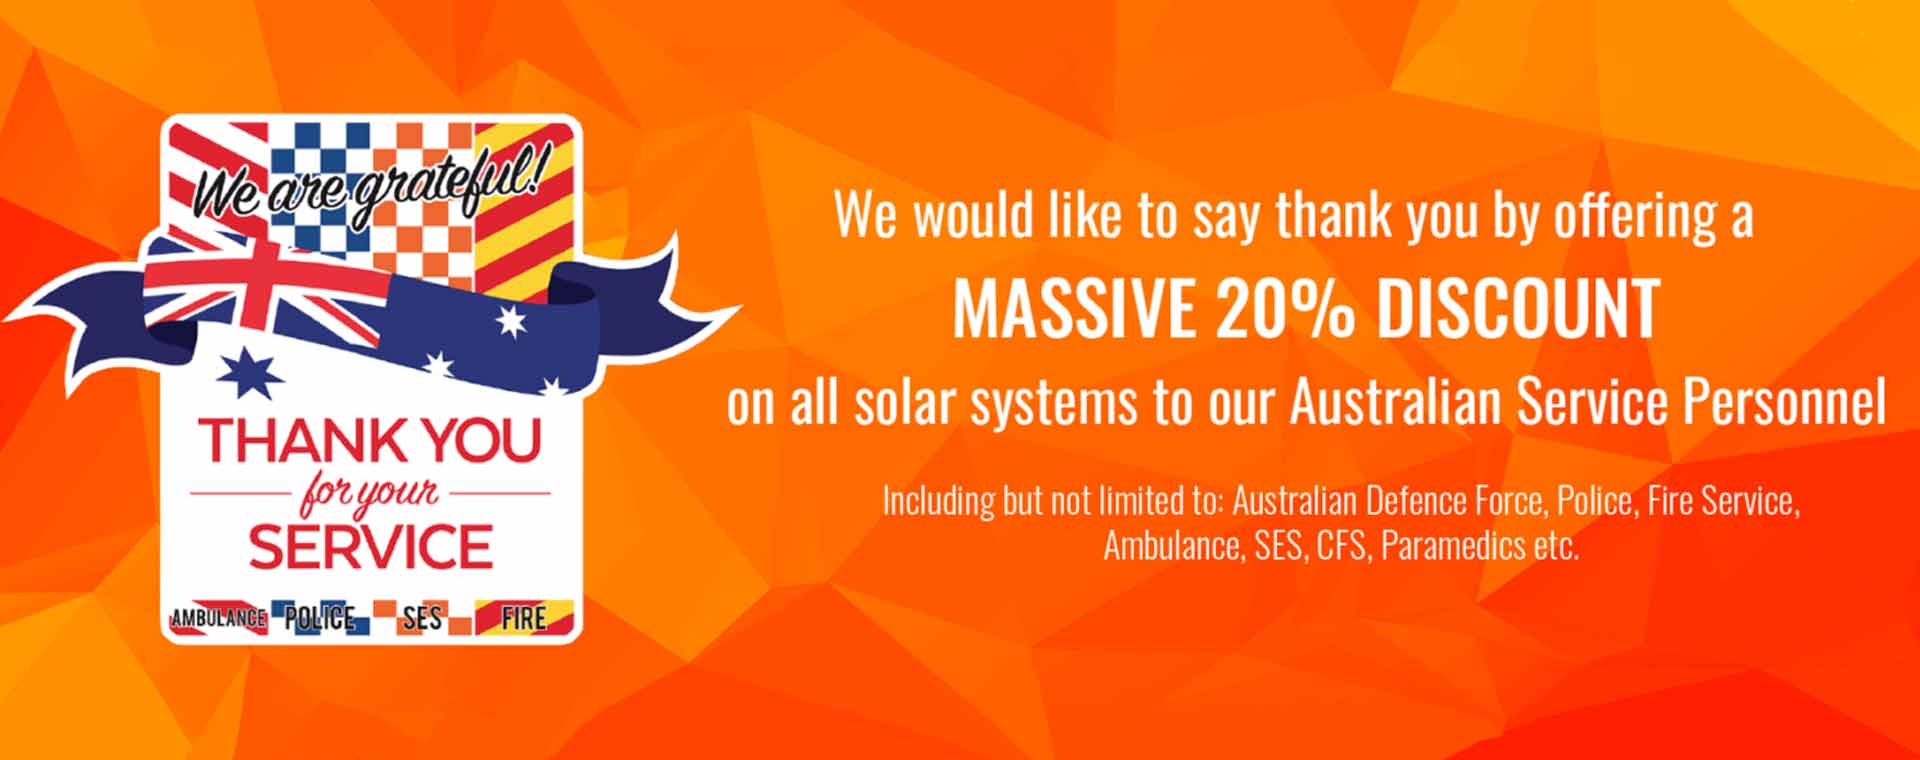 20% discount on solar systems to Australian Service Personnel